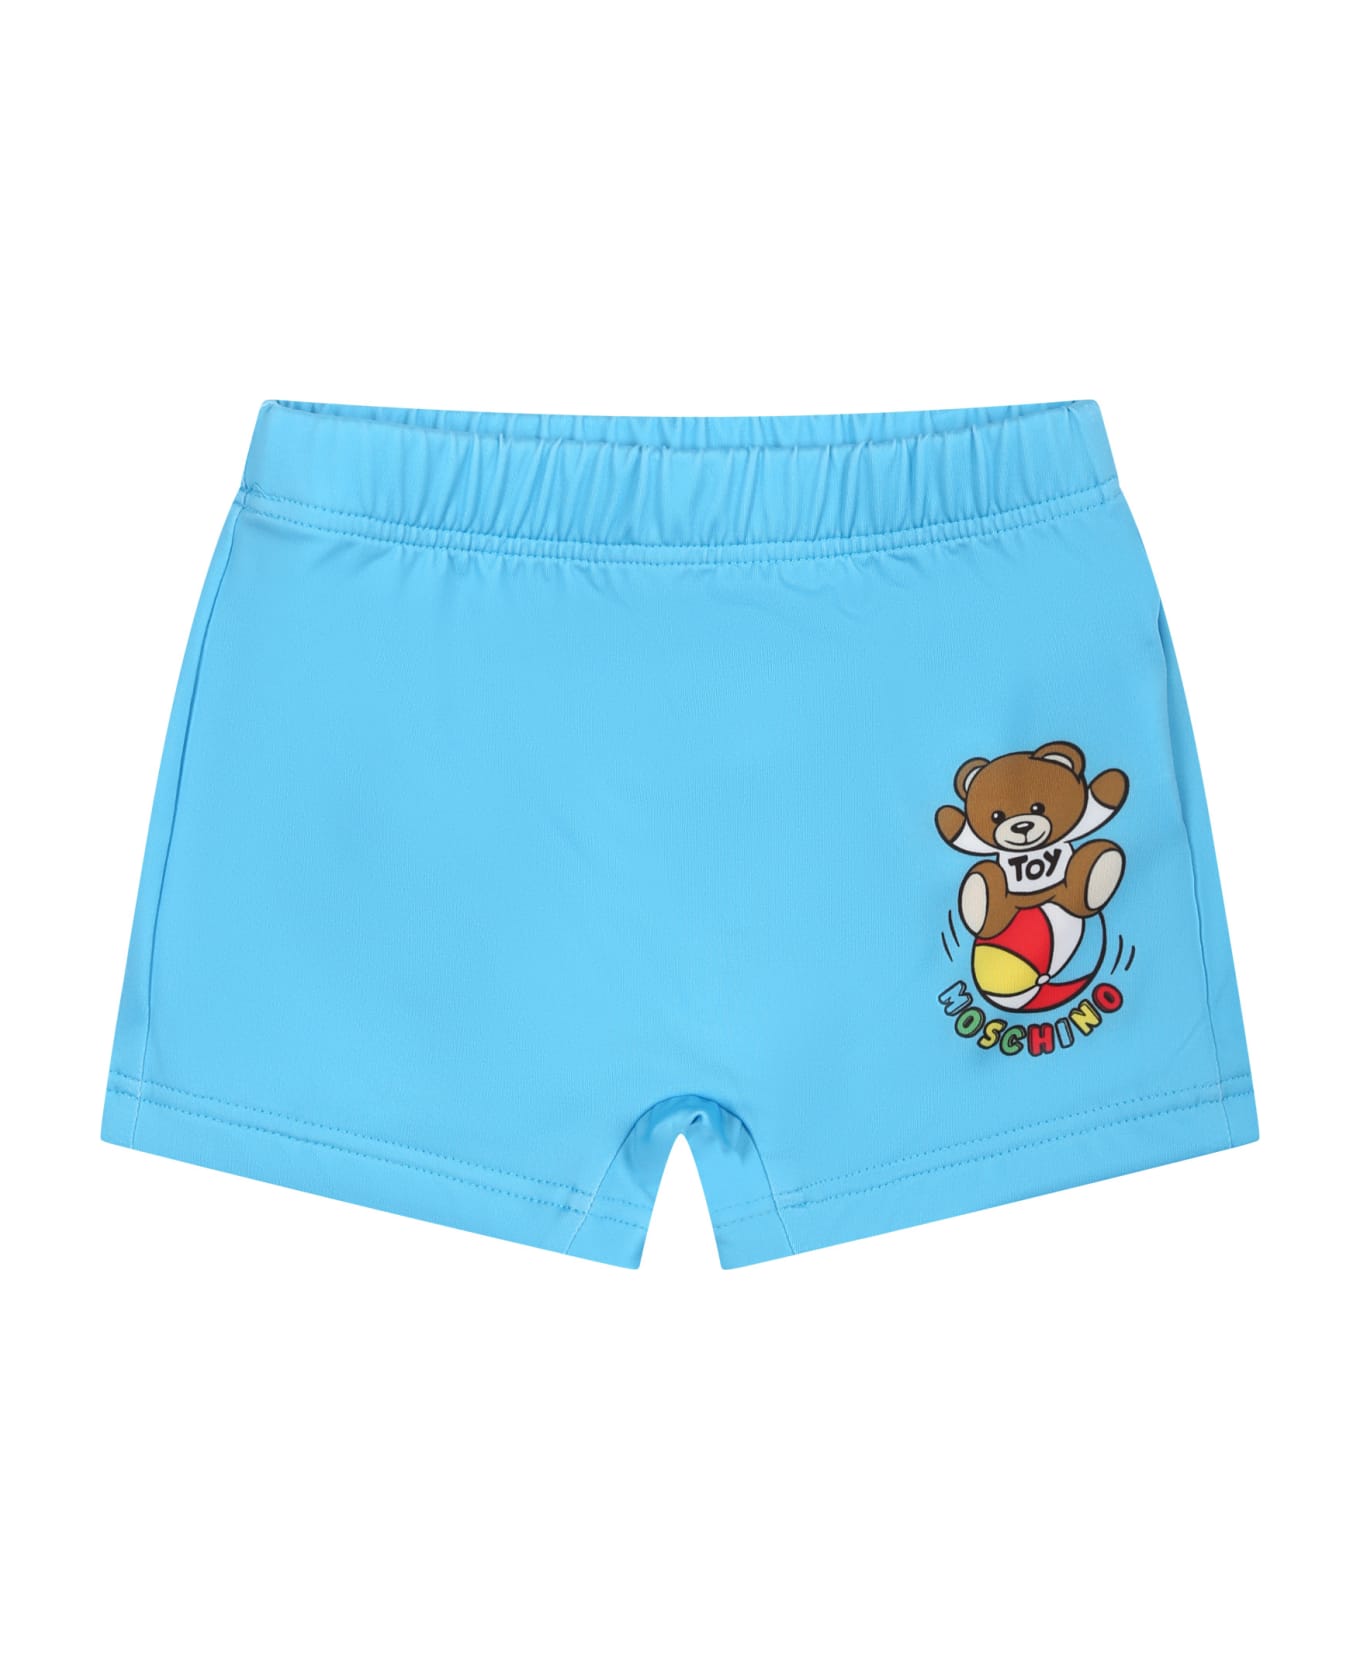 Moschino Light Blue Swimsuit For Baby Boy With Teddy Bear And Multicolor Logo - Light Blue 水着